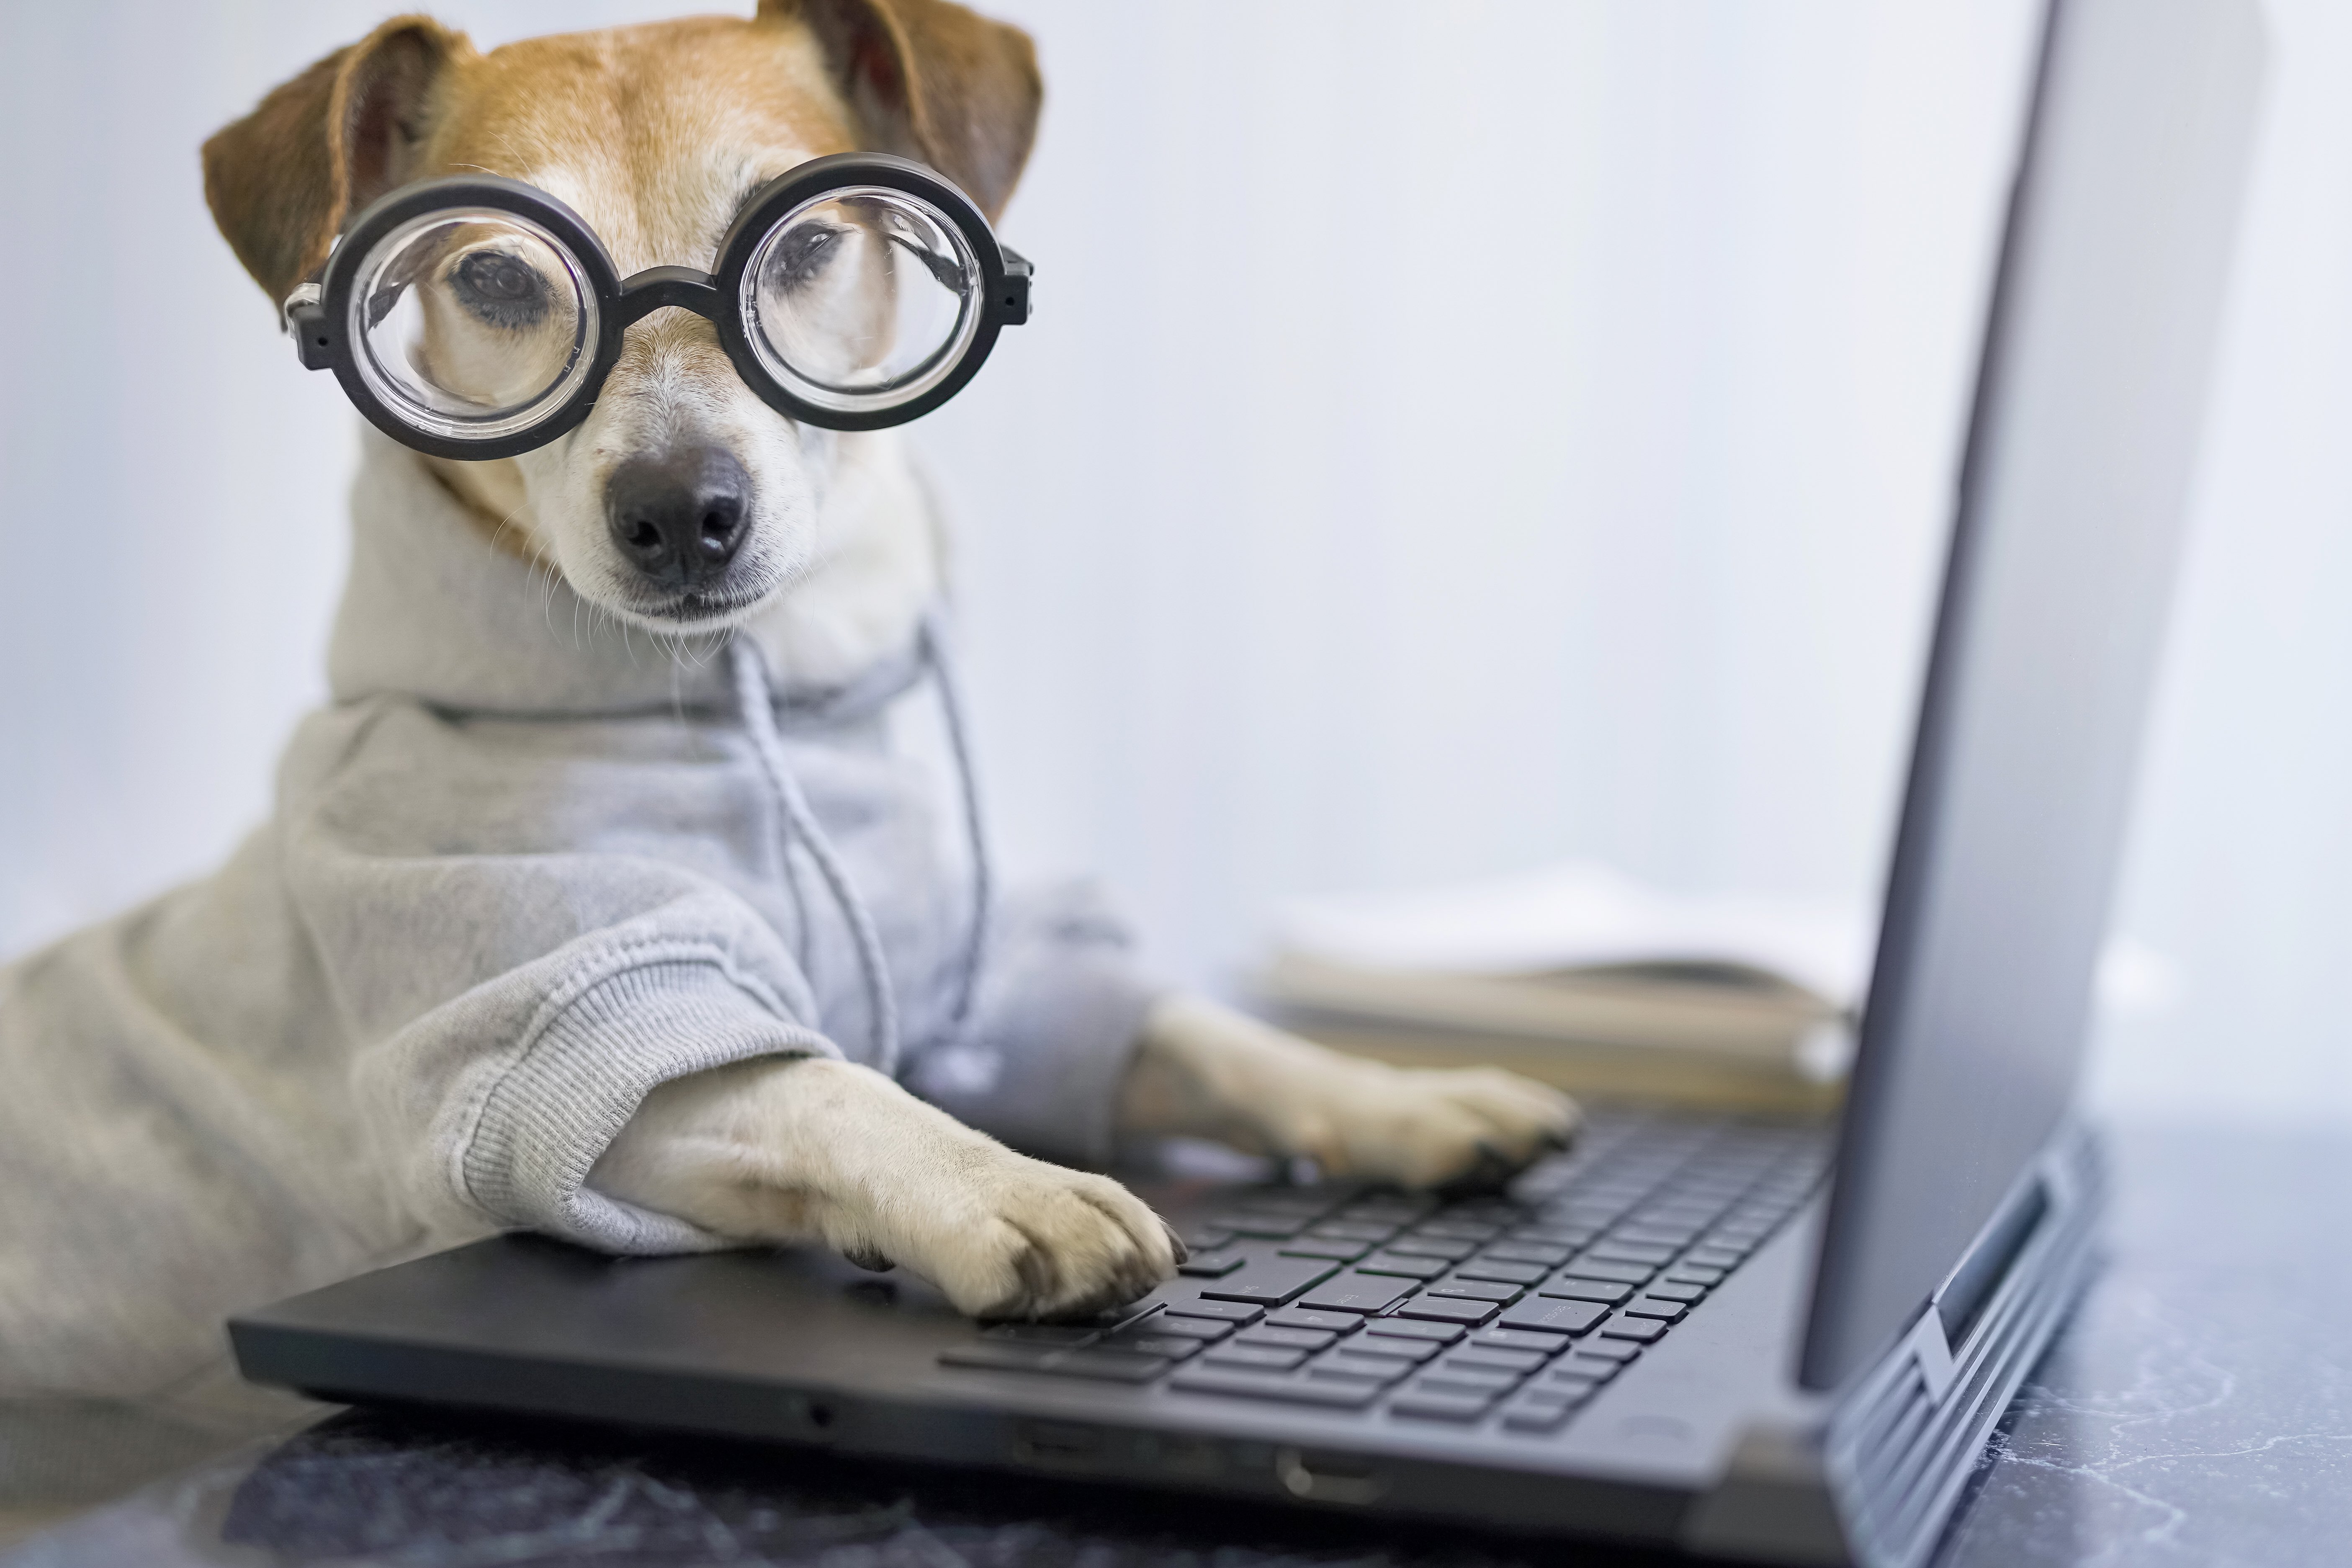 Dog with Glasses on a keyboard